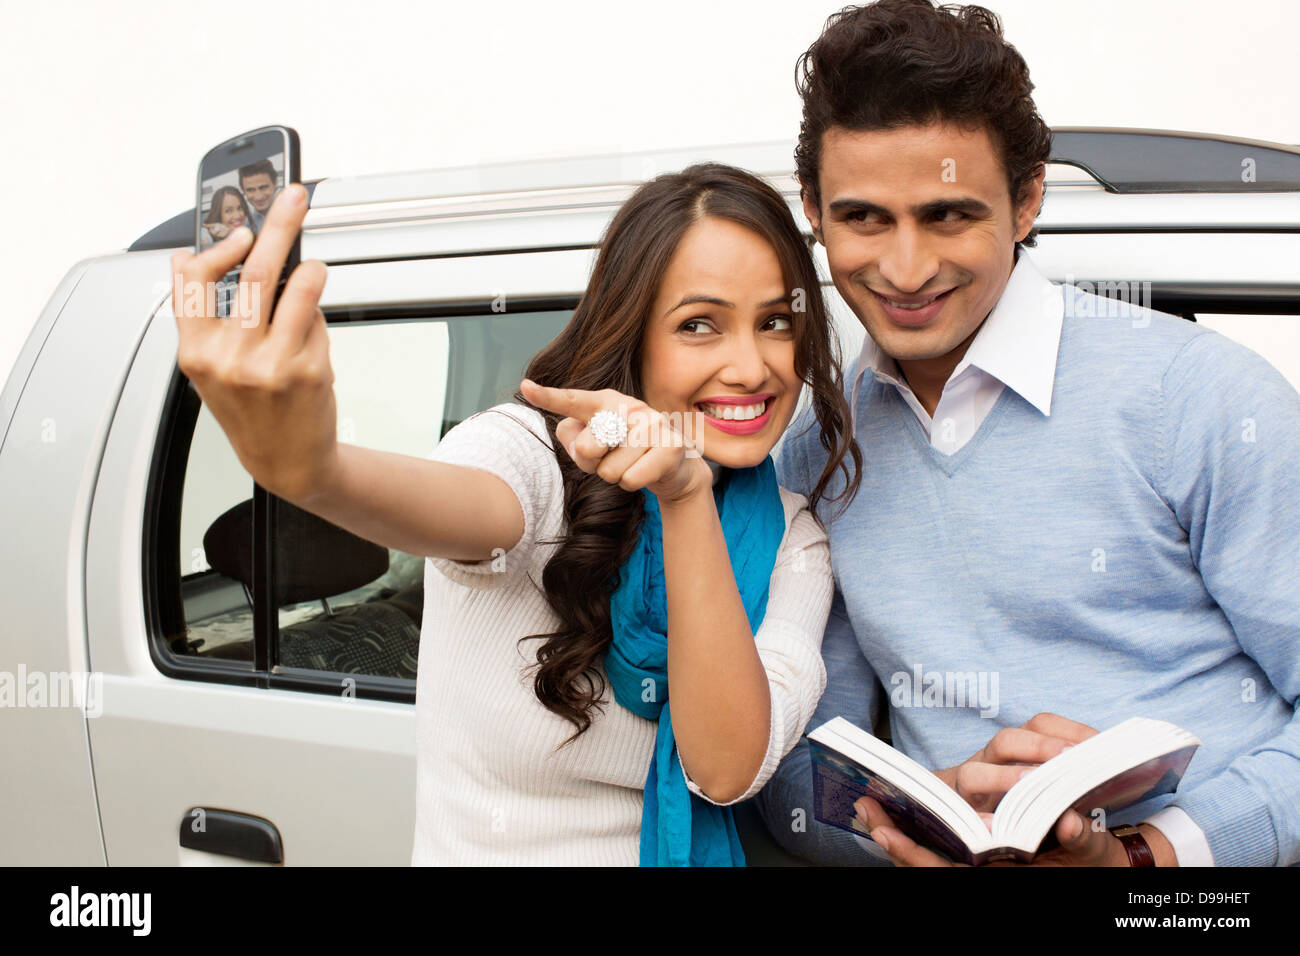 Couple taking picture of themselves with a mobile phone Stock Photo